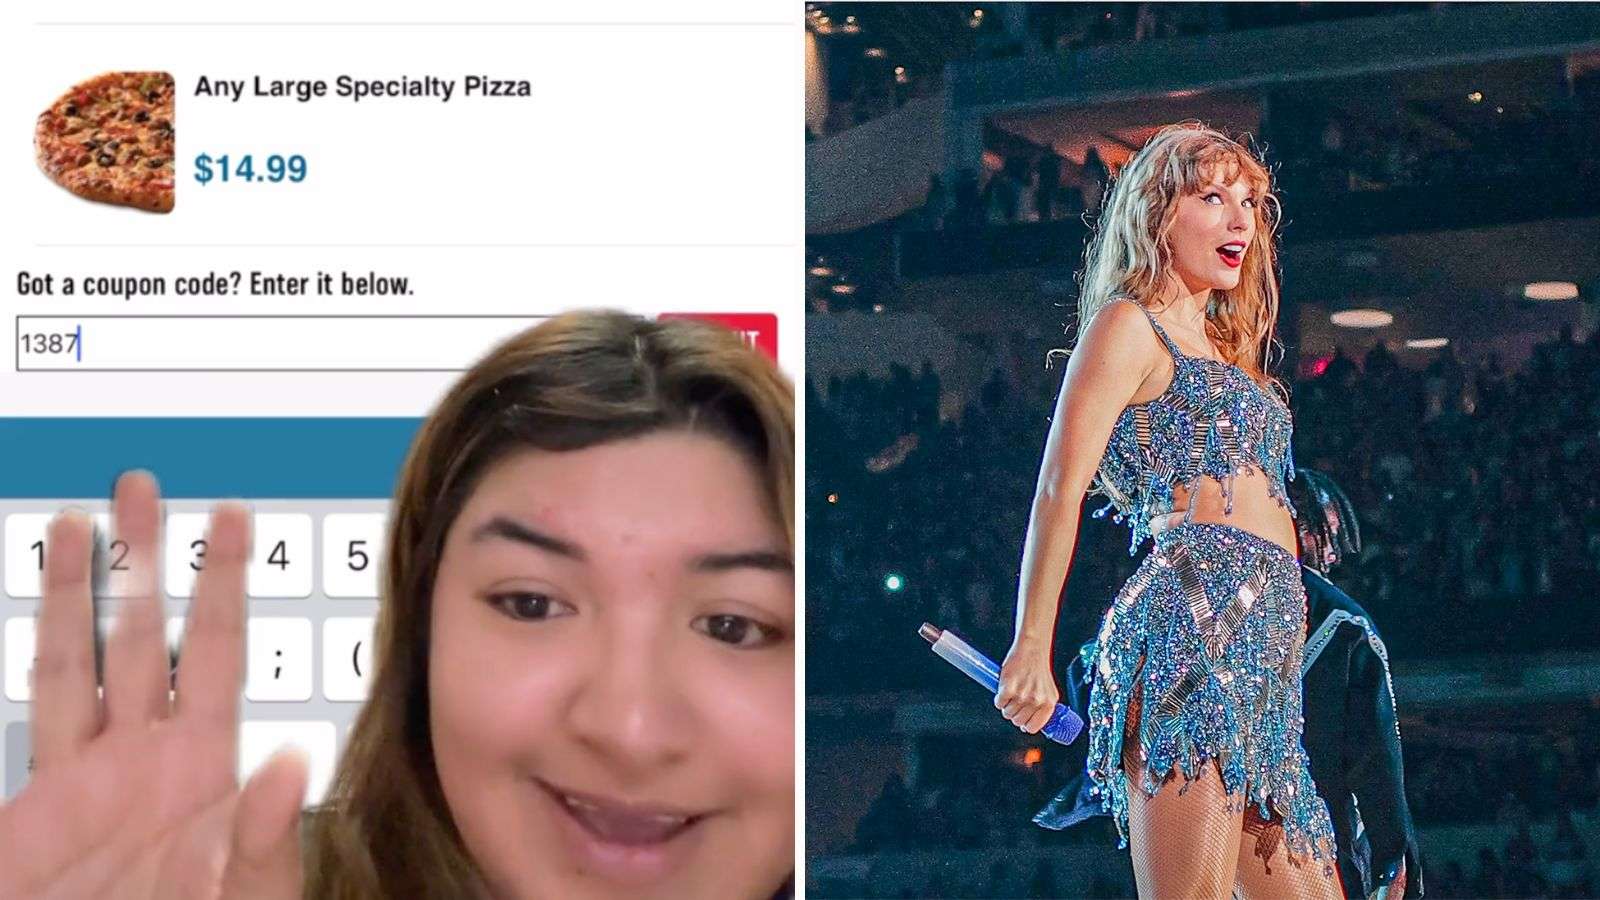 Woman finds Taylor Swift easter egg in Domino's menu